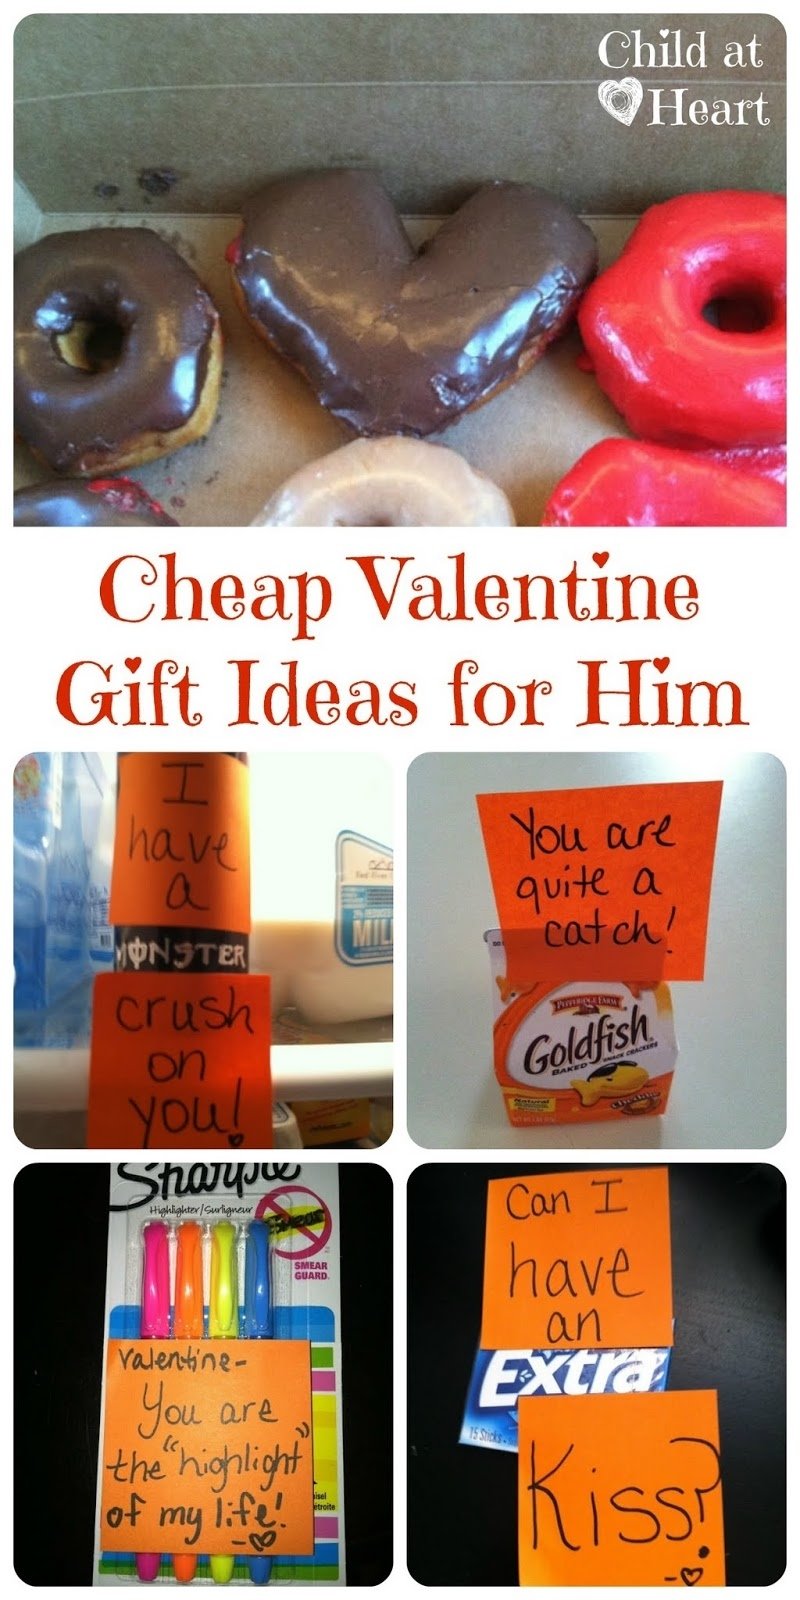 10 Elegant Cheap Ideas For Valentines Day cheap valentine gift ideas for him child at heart blog 2 2022